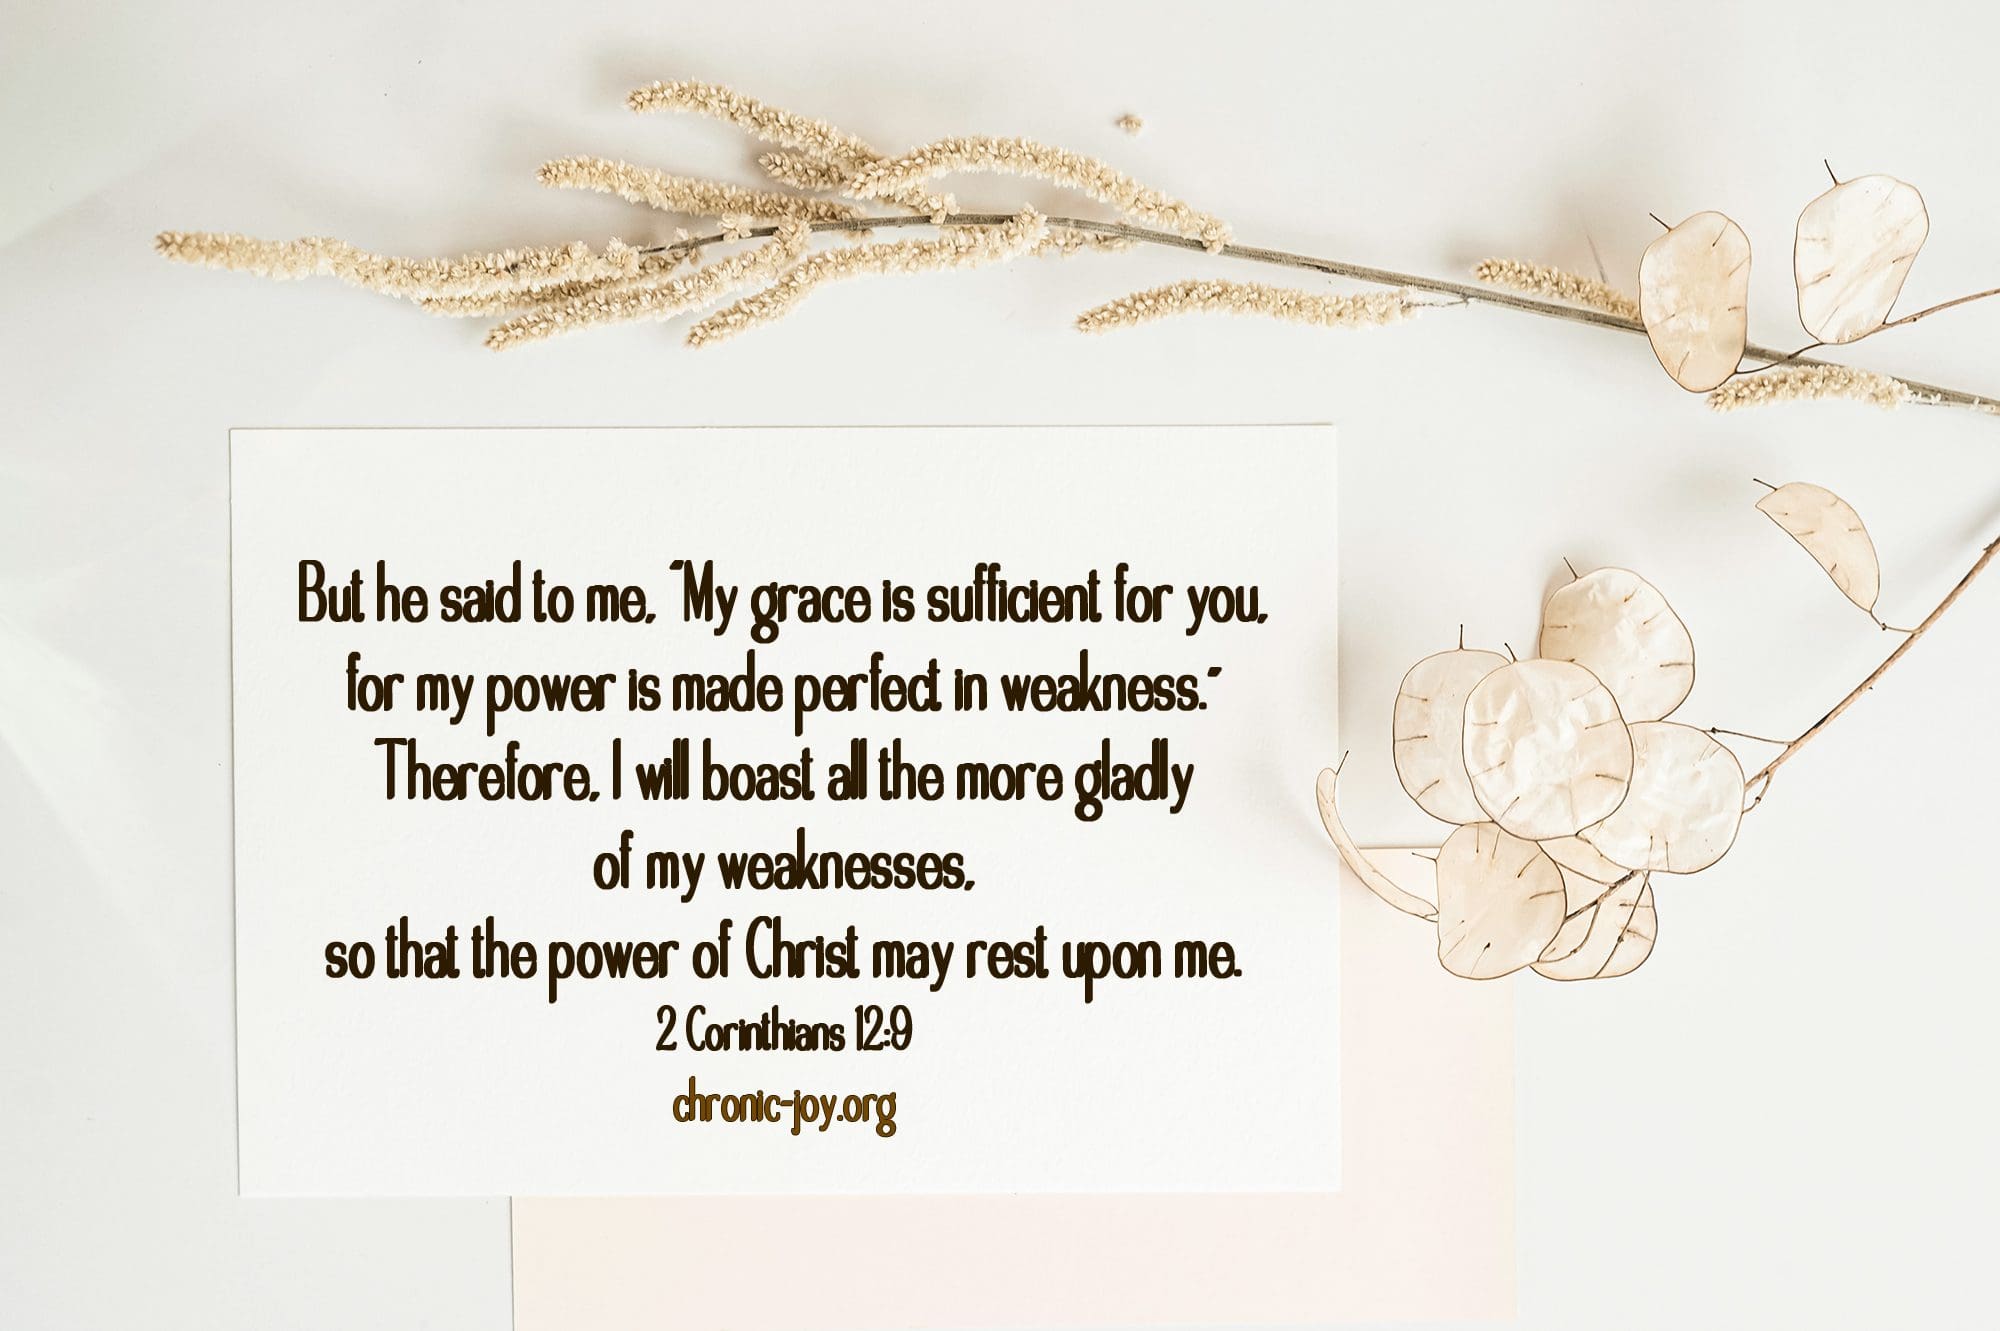 But he said to me, "My grace is sufficient for you, for my power is made perfect in weakness." Therefore, I will boast all the more gladly of my weaknesses., so that the power of Christ may rest upon me. (2 Corinthians 12:9)